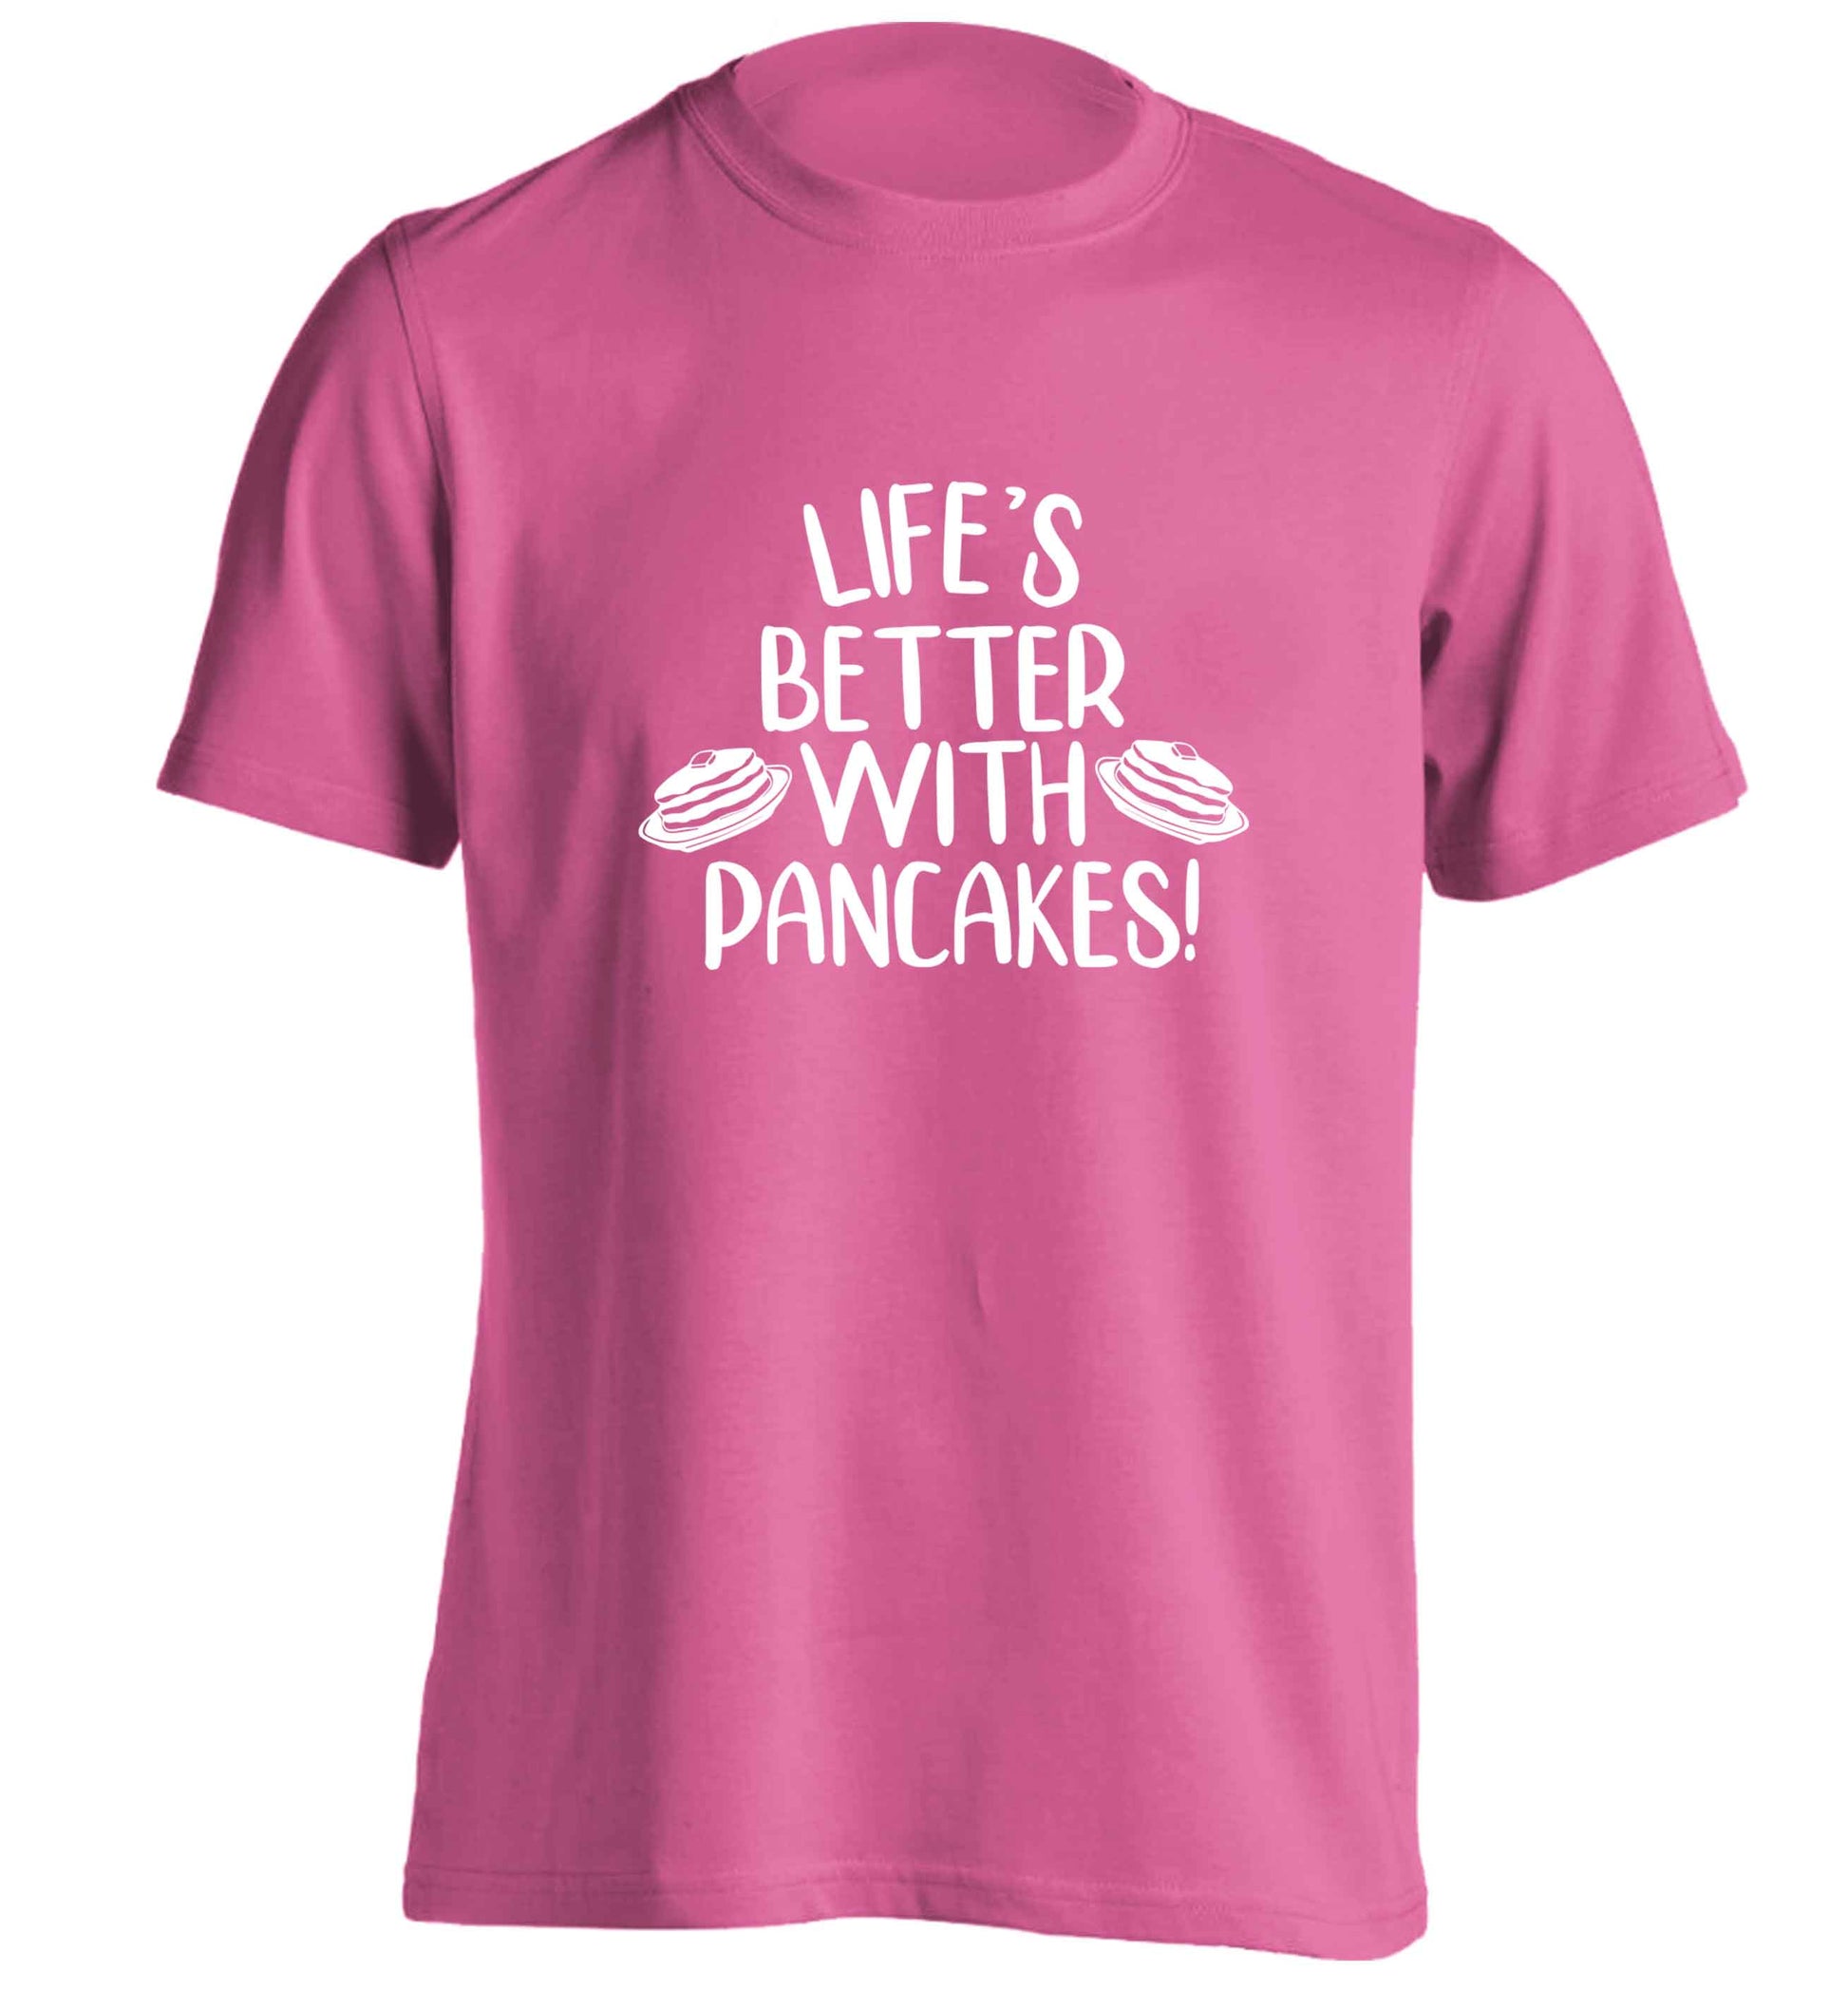 Life's better with pancakes adults unisex pink Tshirt 2XL